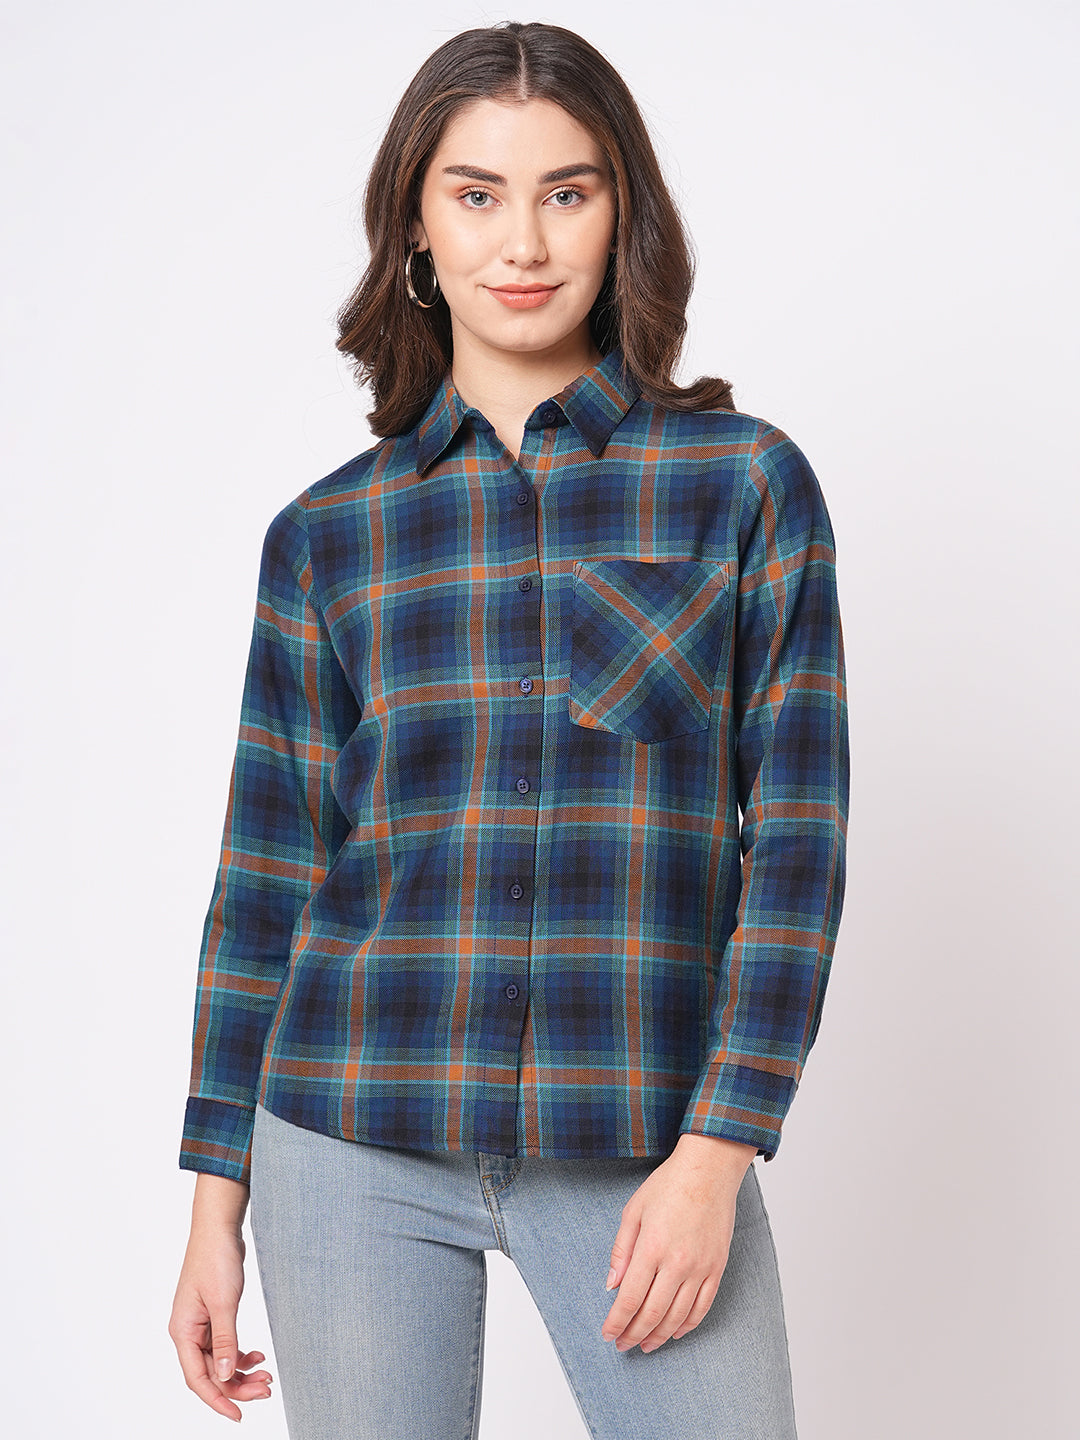 Bombay High Women's Navy Blue Chequered Relaxed Fit Full Sleeves Shirt